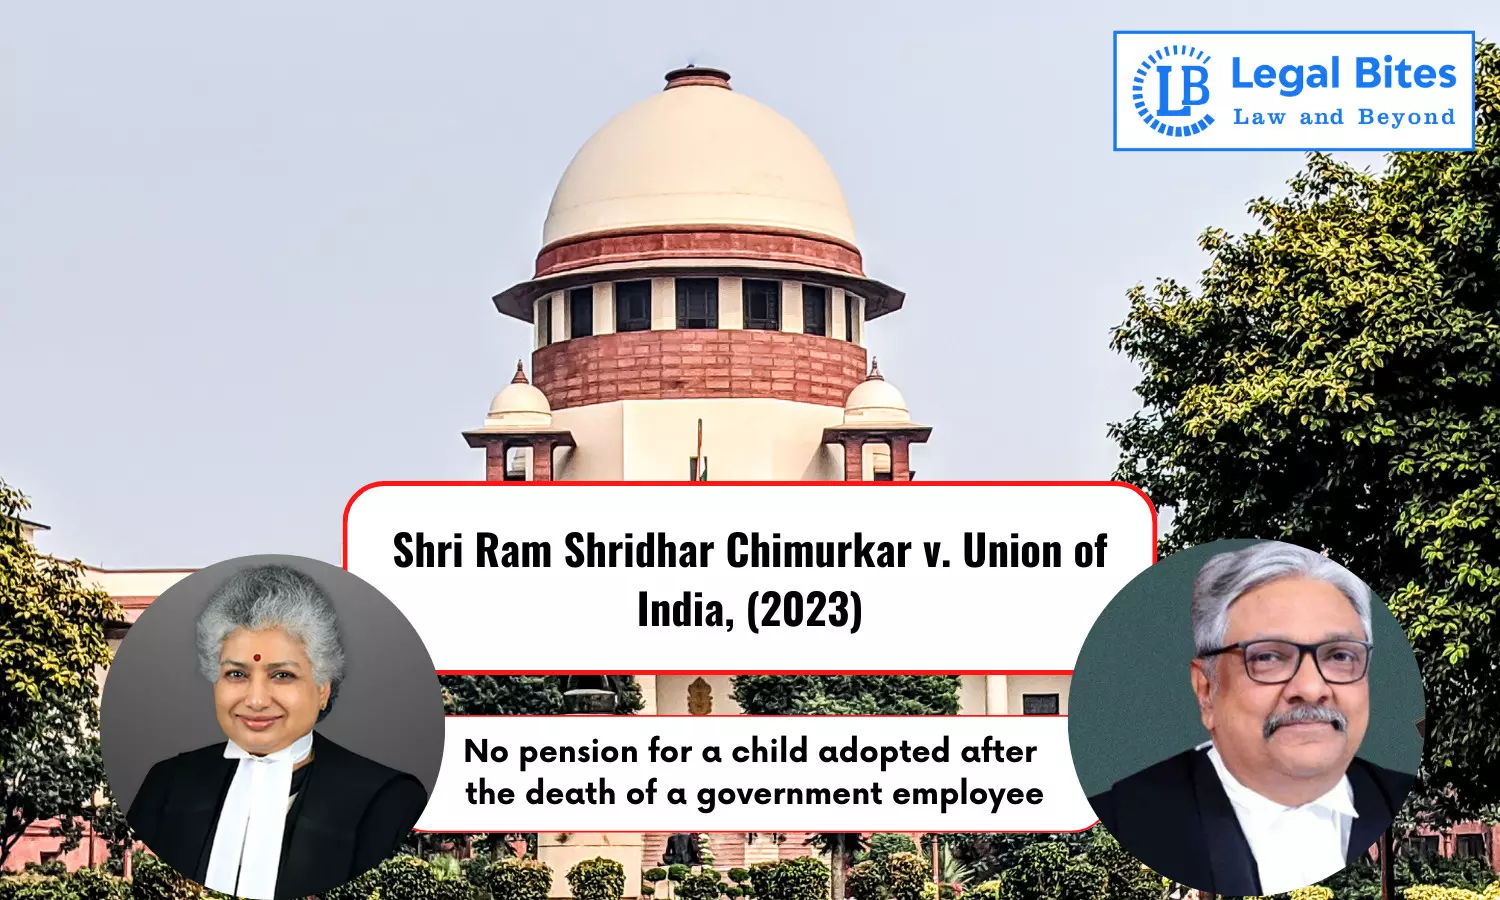 Case Analysis: Shri Ram Shridhar Chimurkar v. Union of India, (2023) | No pension for a child adopted after the death of a government employee